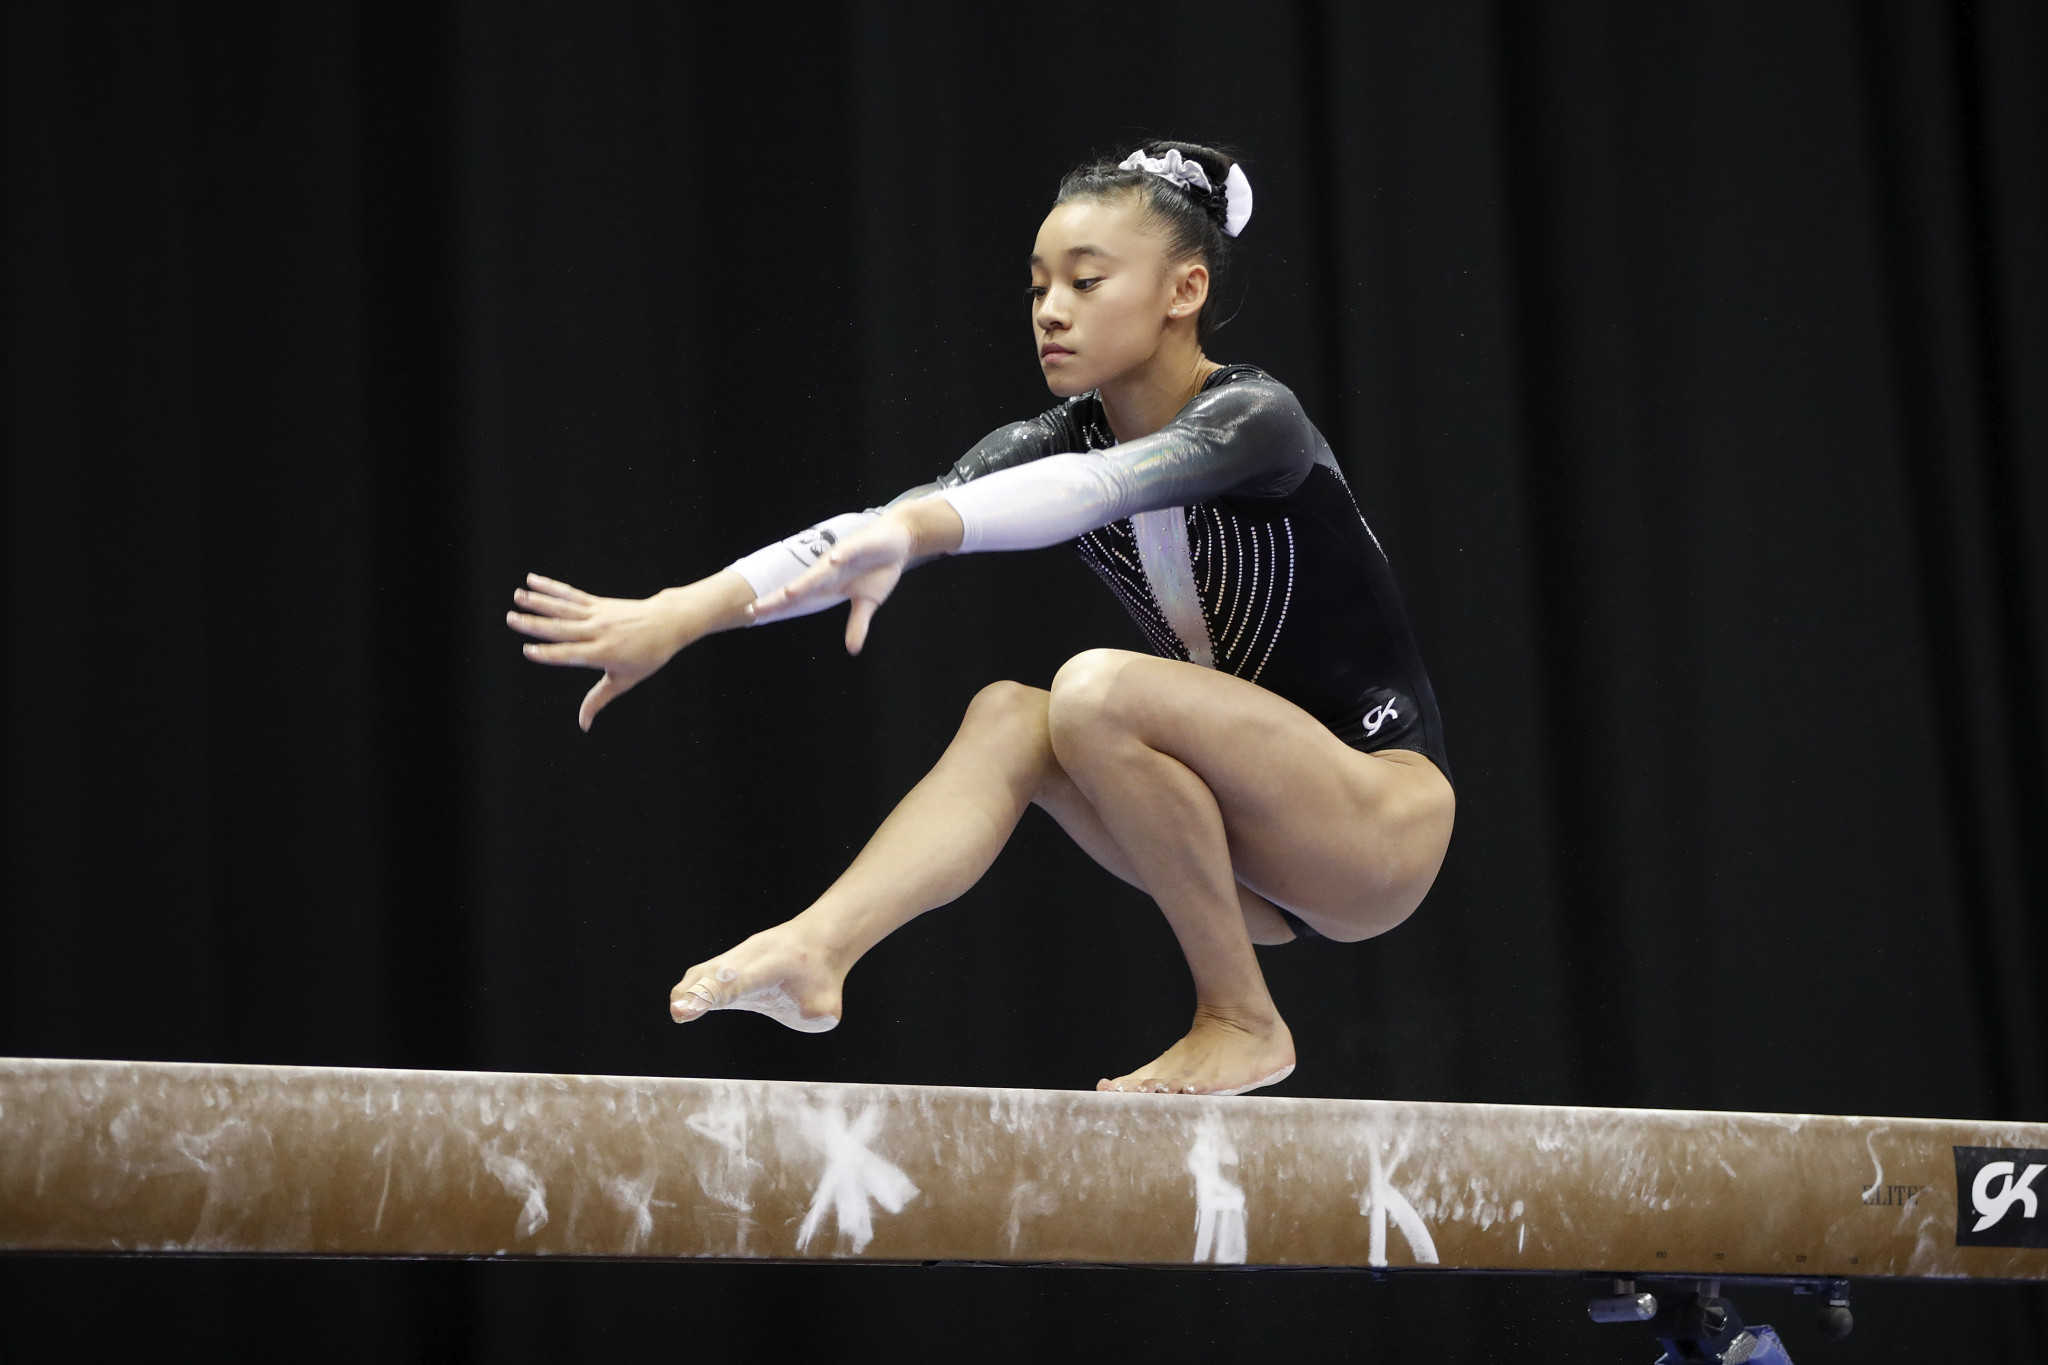 Wong and Moldauer secure gold for United States at FIG All-Around World Cup